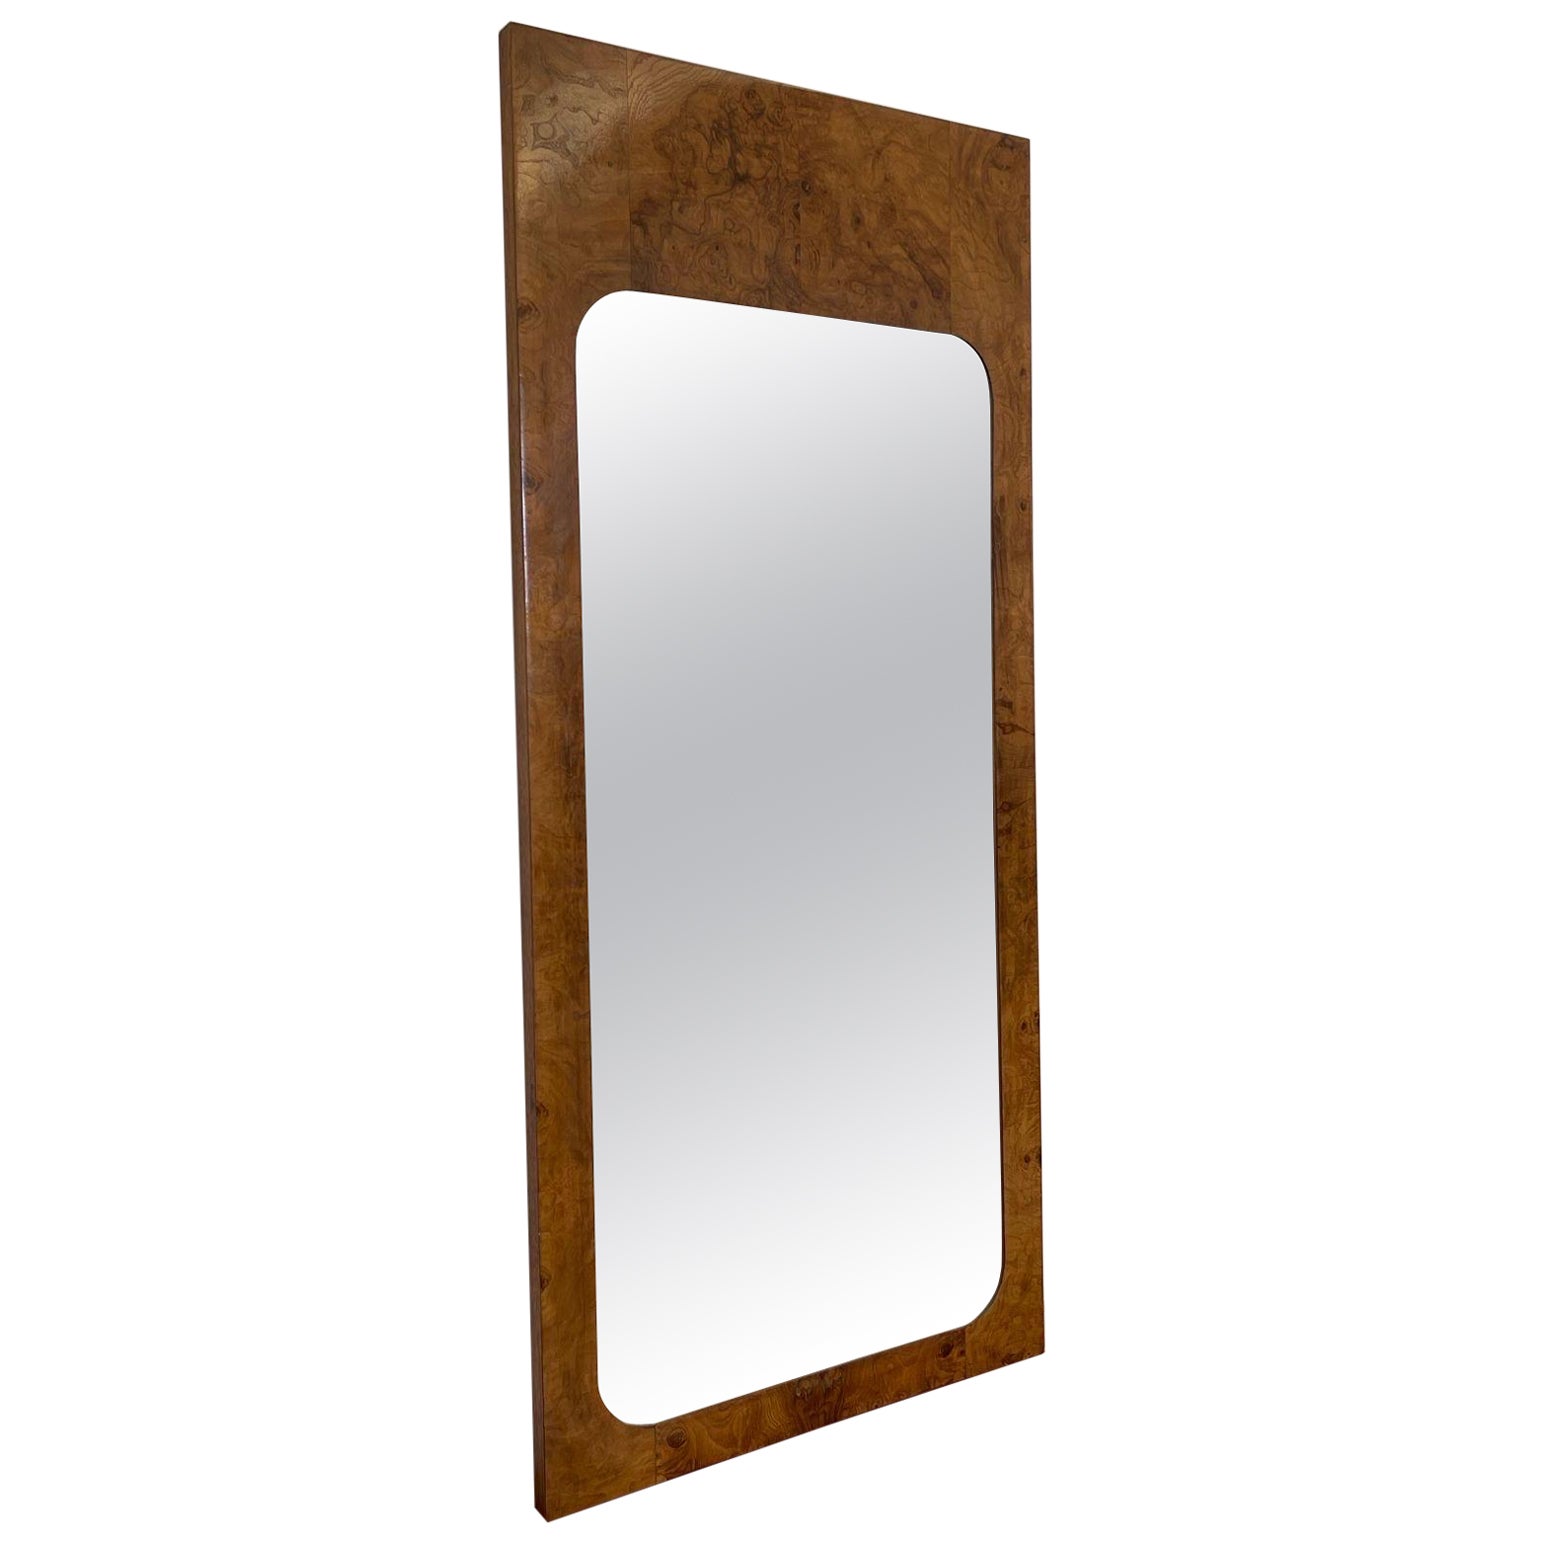 Vintage Milo Baughman Style Burl Wood Framed Wall Mirror by Lane. For Sale